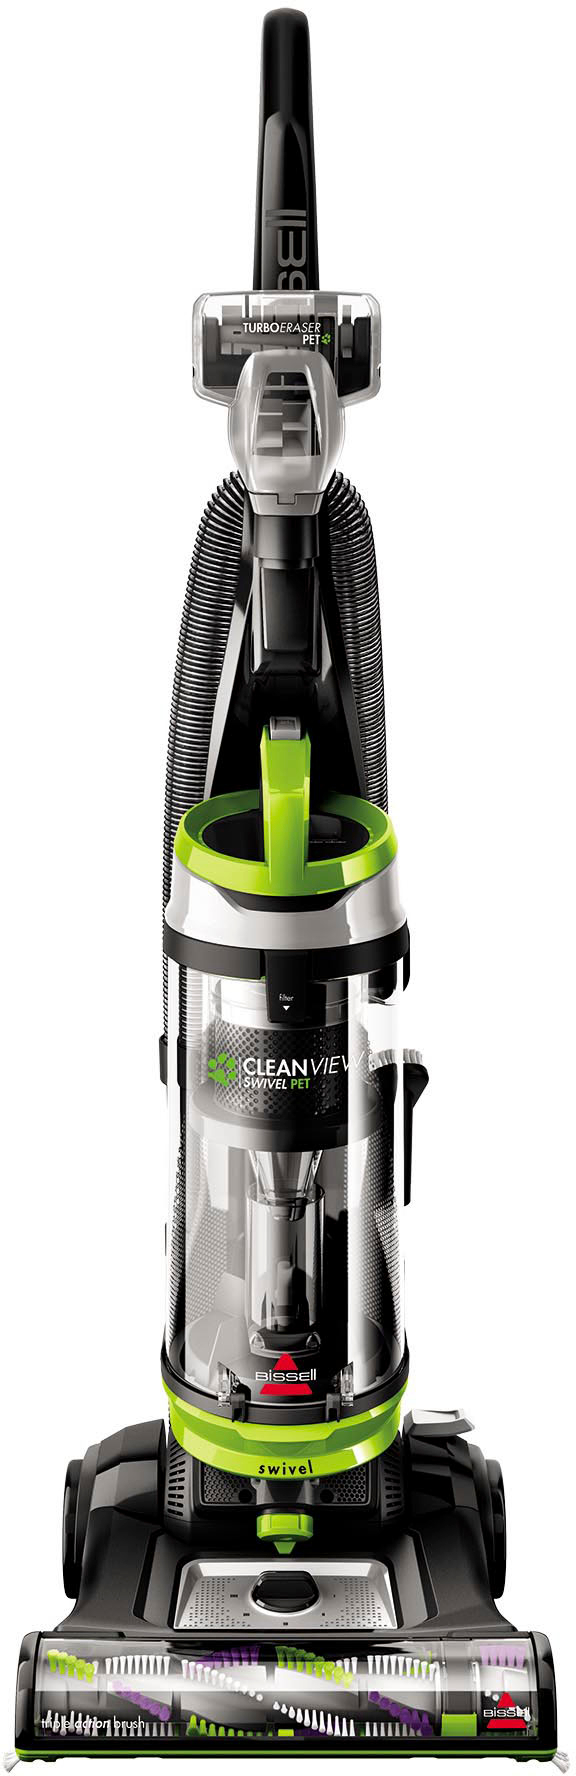 BISSELL CleanView Swivel Pet Vacuum Cleaner Sparkle Silver/Cha Cha Lime  with black accents 2316 - Best Buy